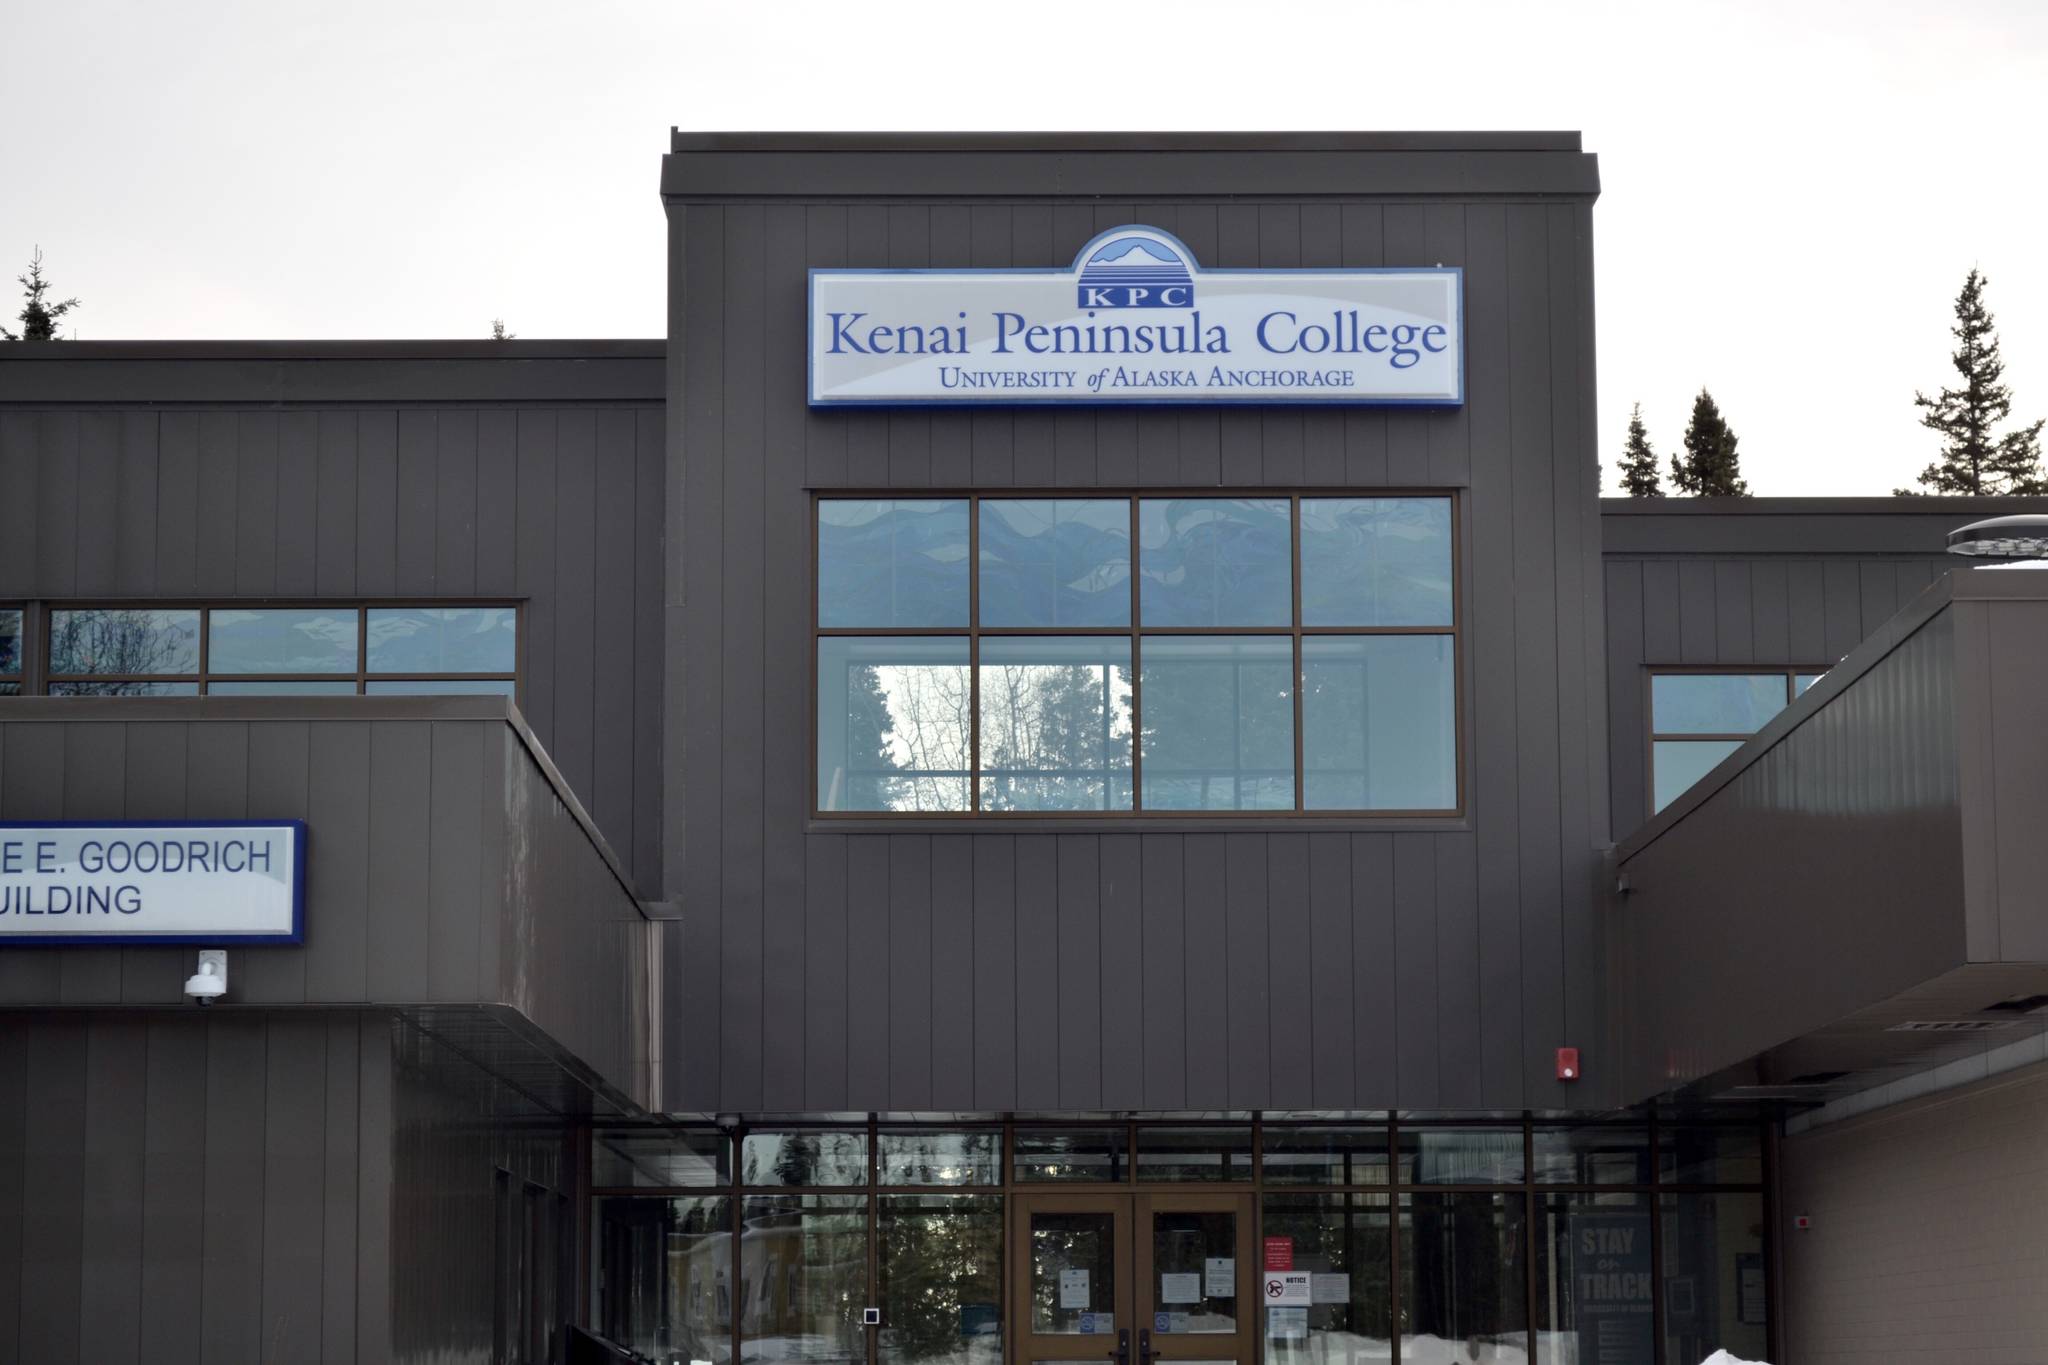 Kenai Peninsula College is photographed on March 26, 2020. (Victoria Petersen/Peninsula Clarion)